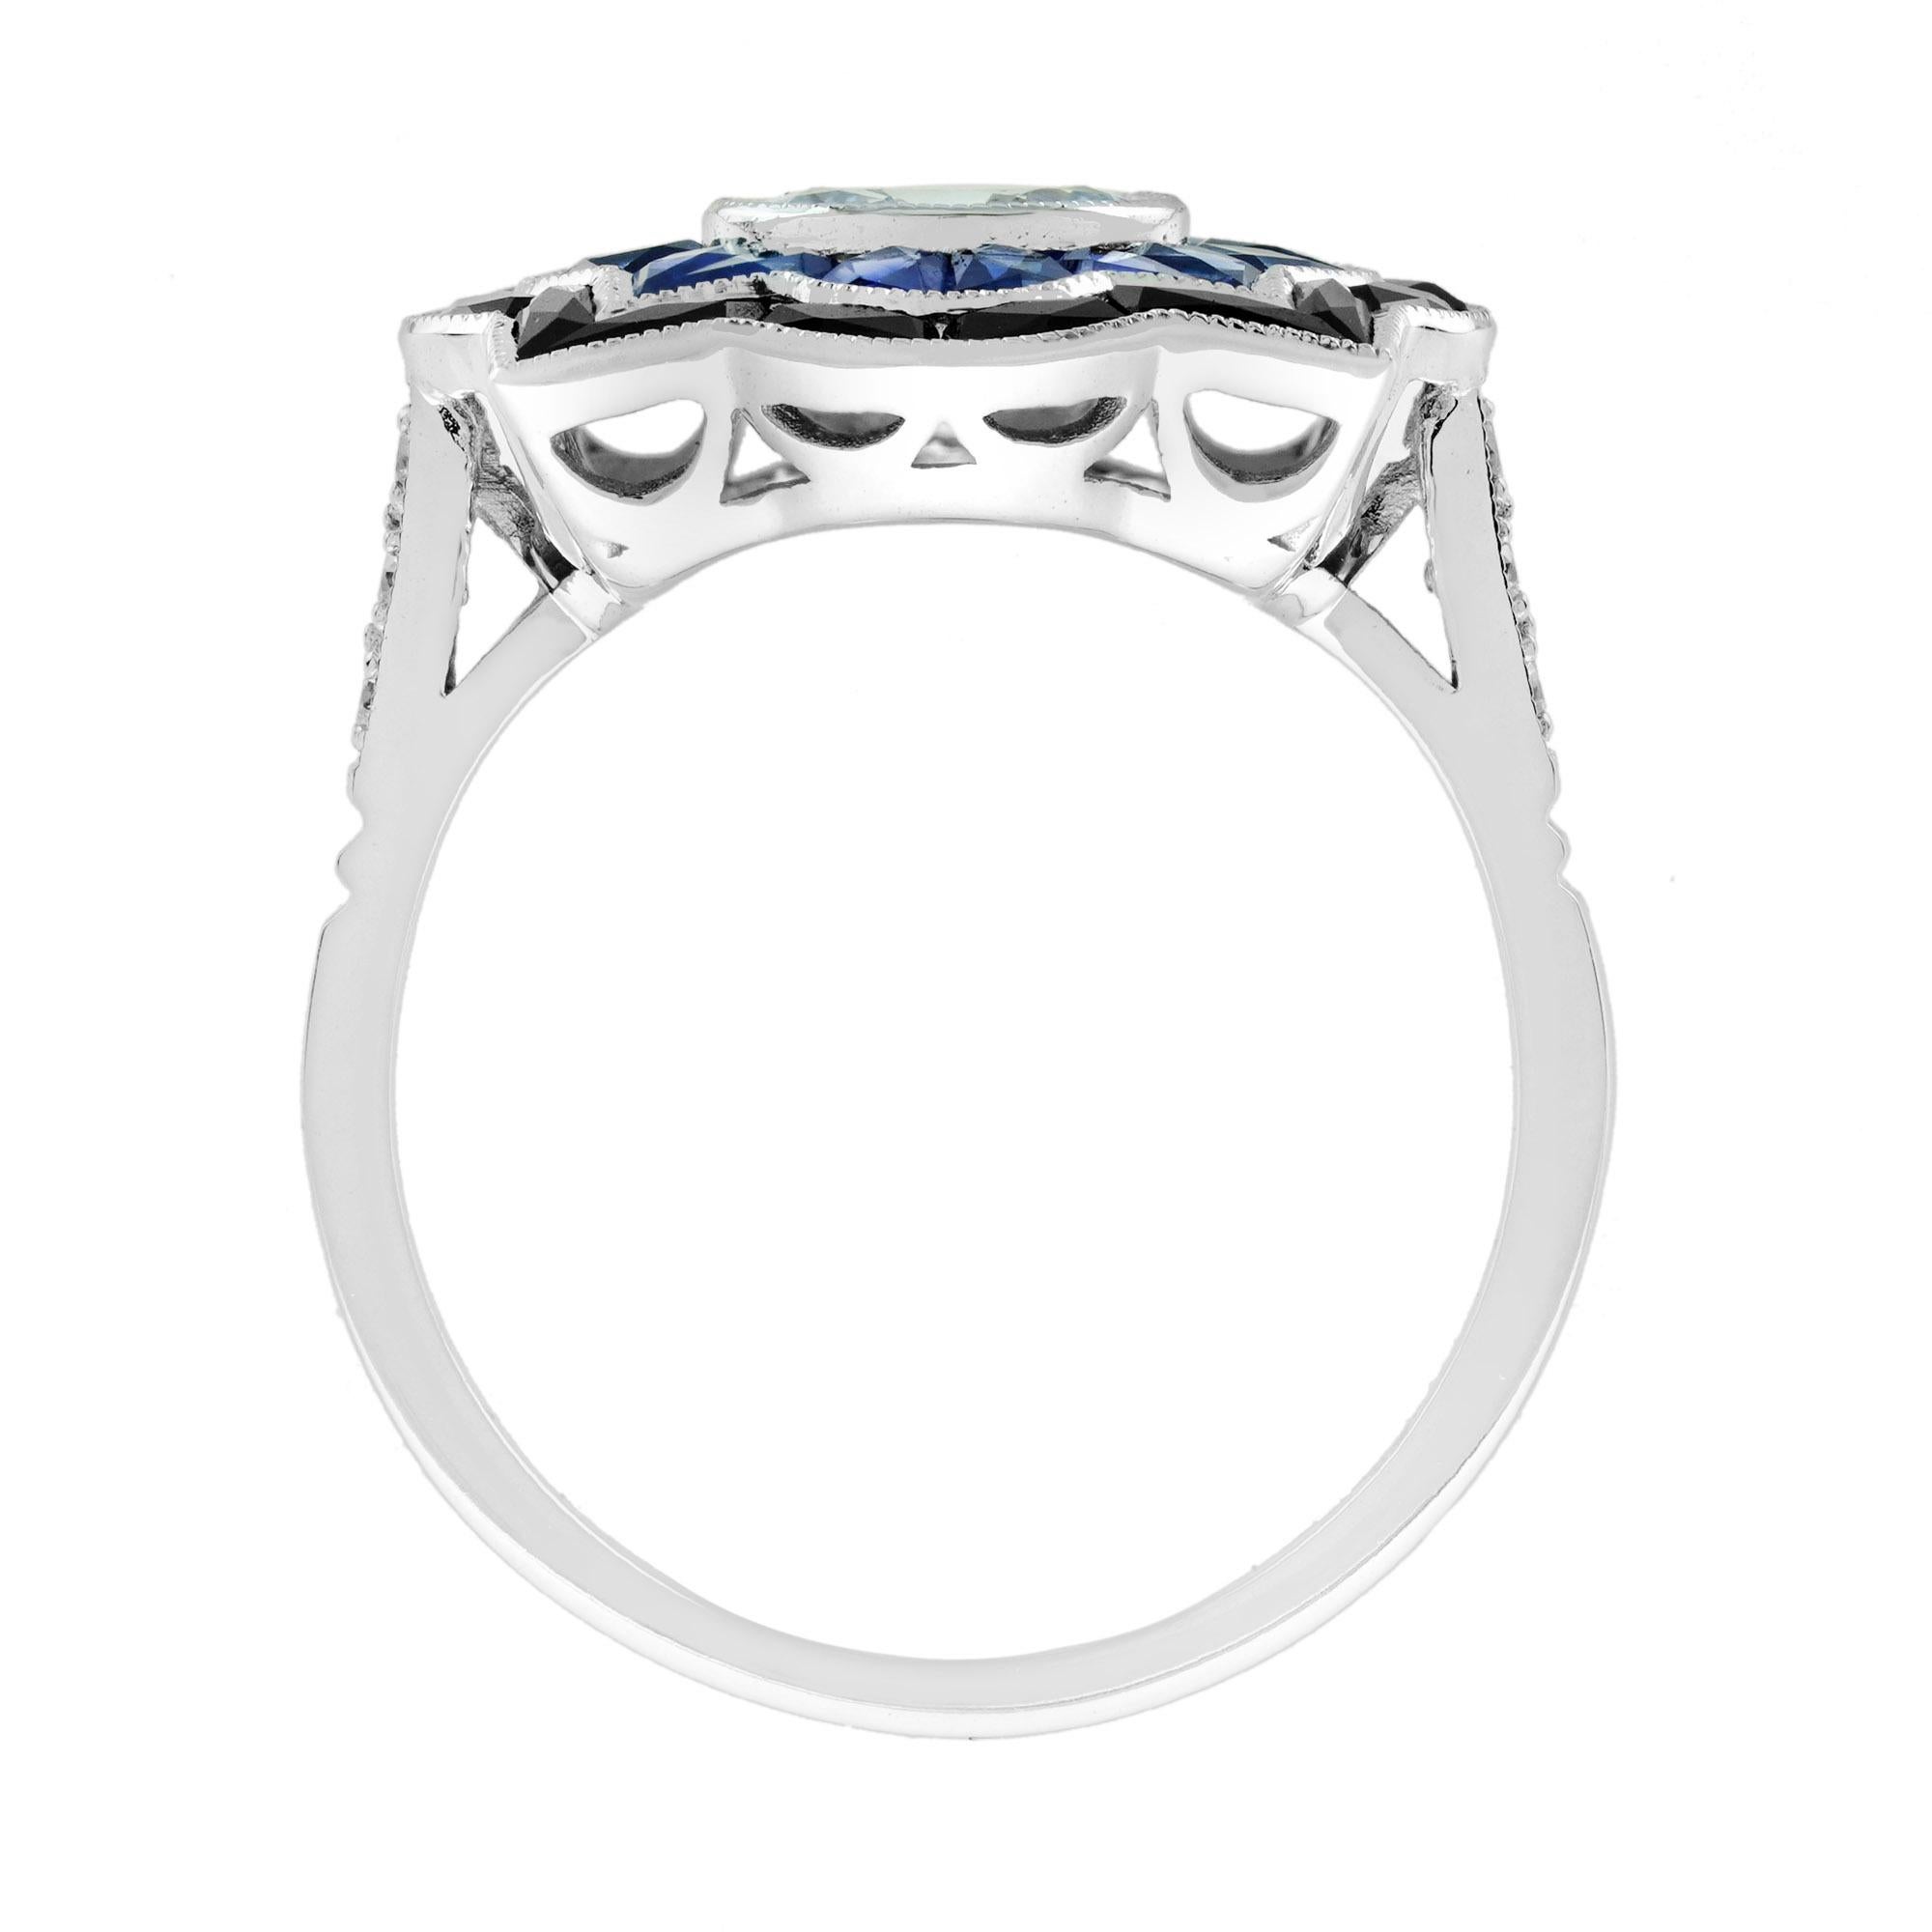 For Sale:  Aquamarine Sapphire Onyx Art Deco Style Target Engagement Ring in 18K White Gold 7